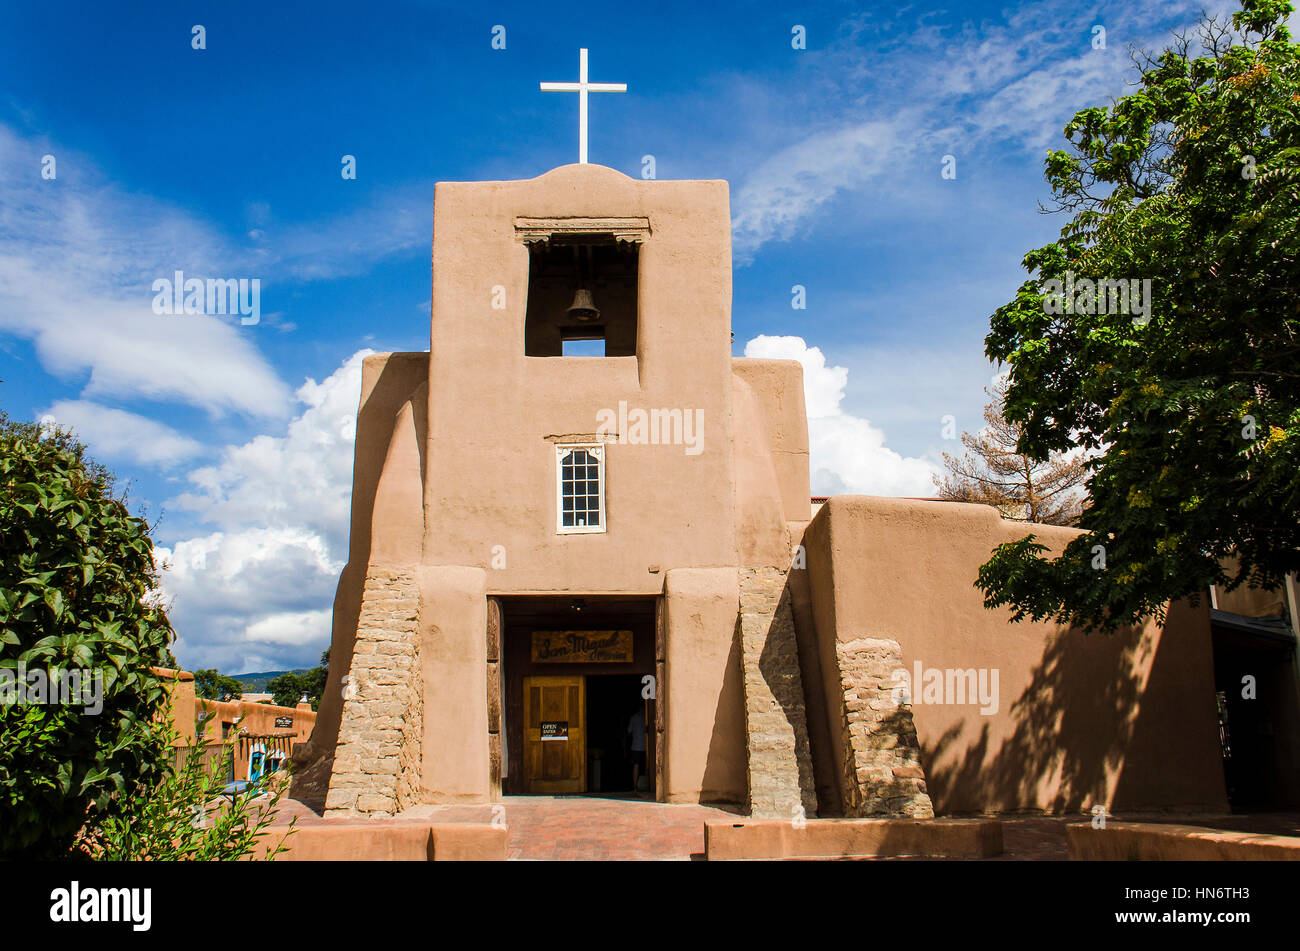 Santa Fe, USA - July 30, 2015: San Miguel Mission chapel church, the oldest in the United States, decorated in adobe pueblan style Stock Photo